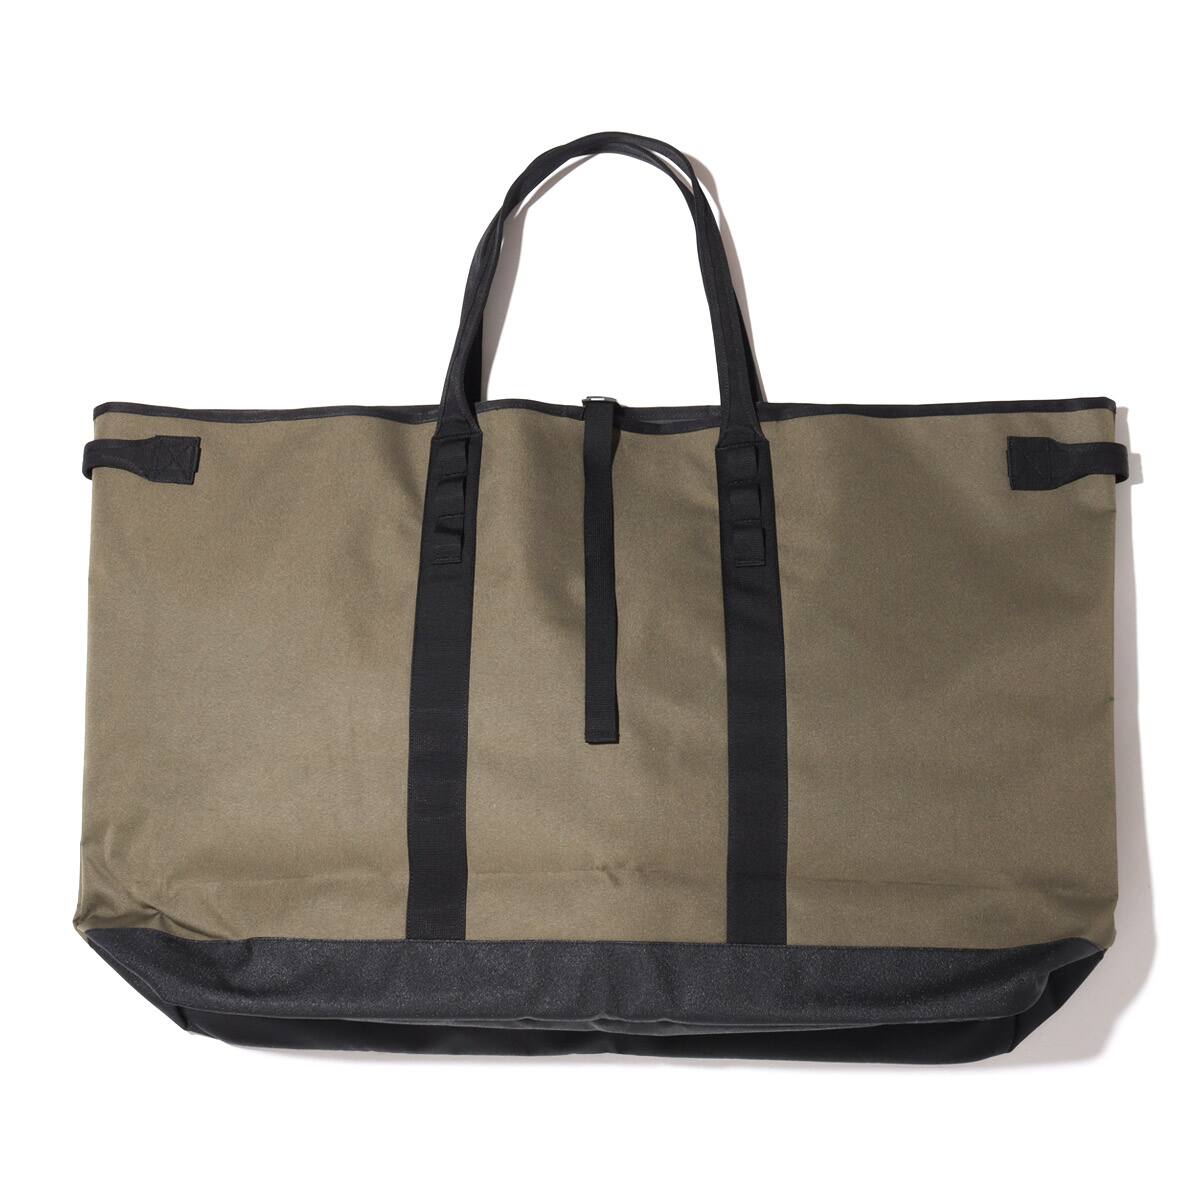 THE NORTH FACE FIELUDENS GEAR TOTE L ニュートープ 21FW-I